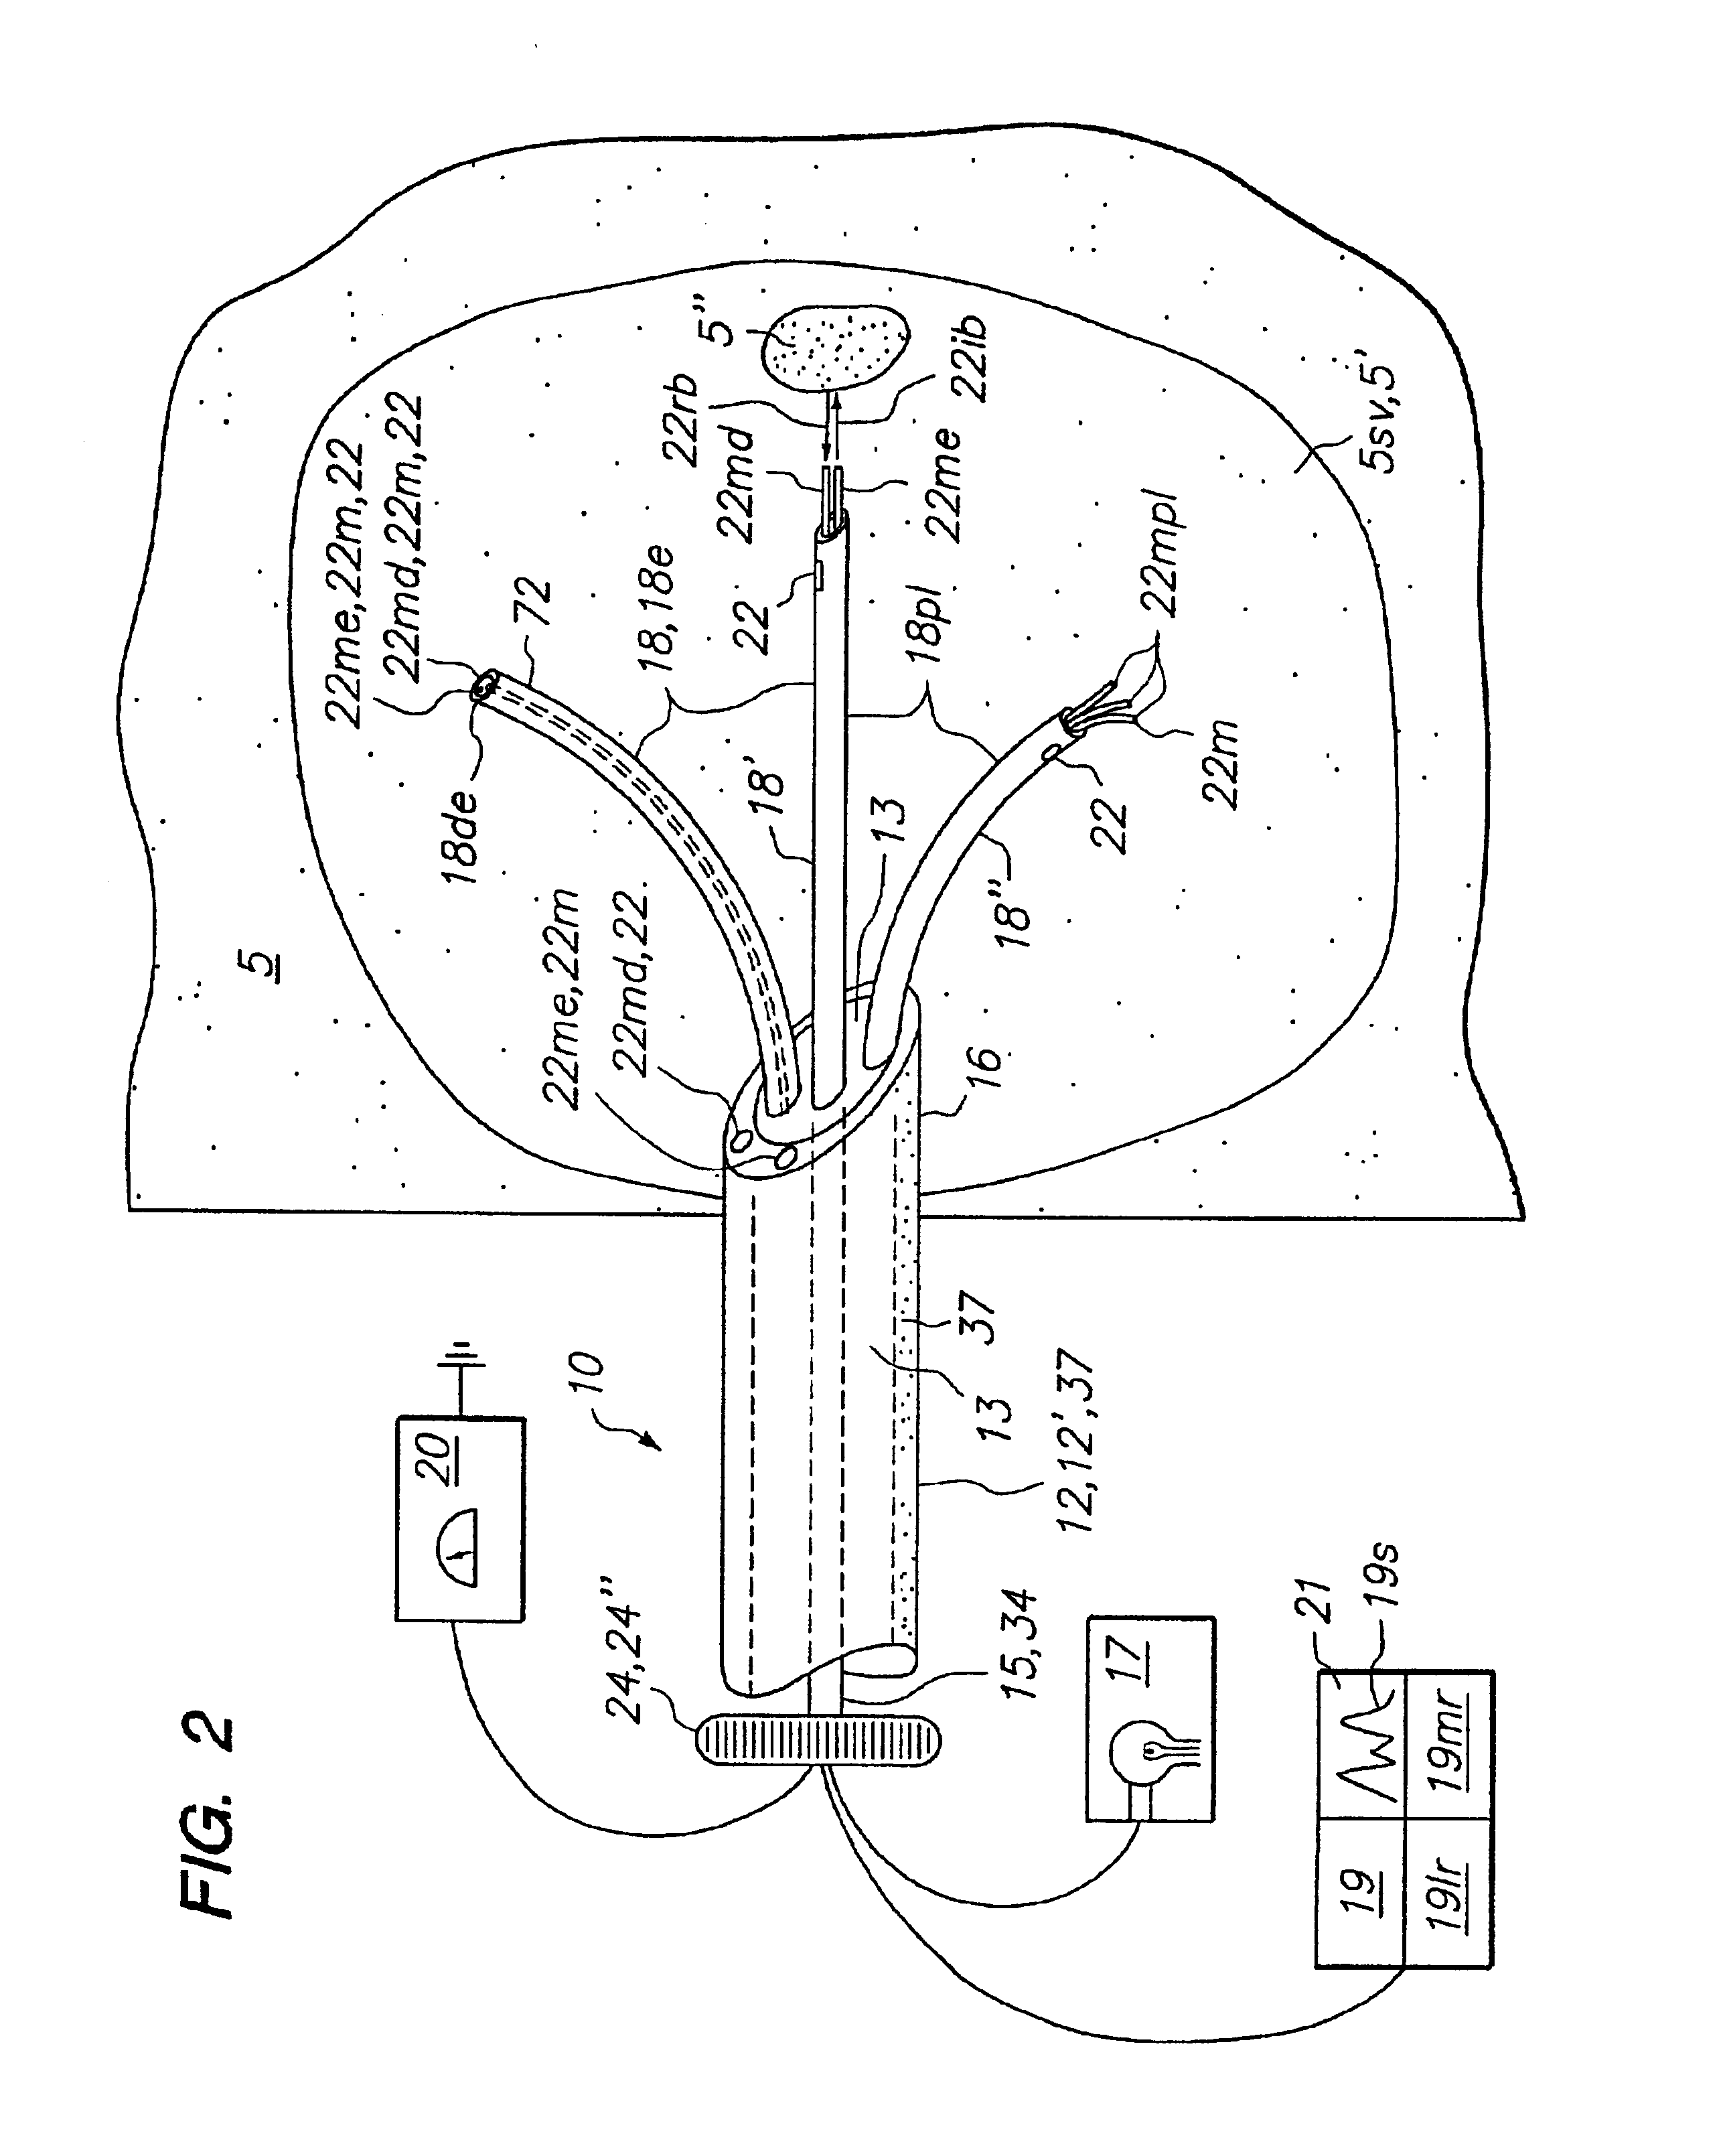 Tissue biopsy and treatment apparatus and method